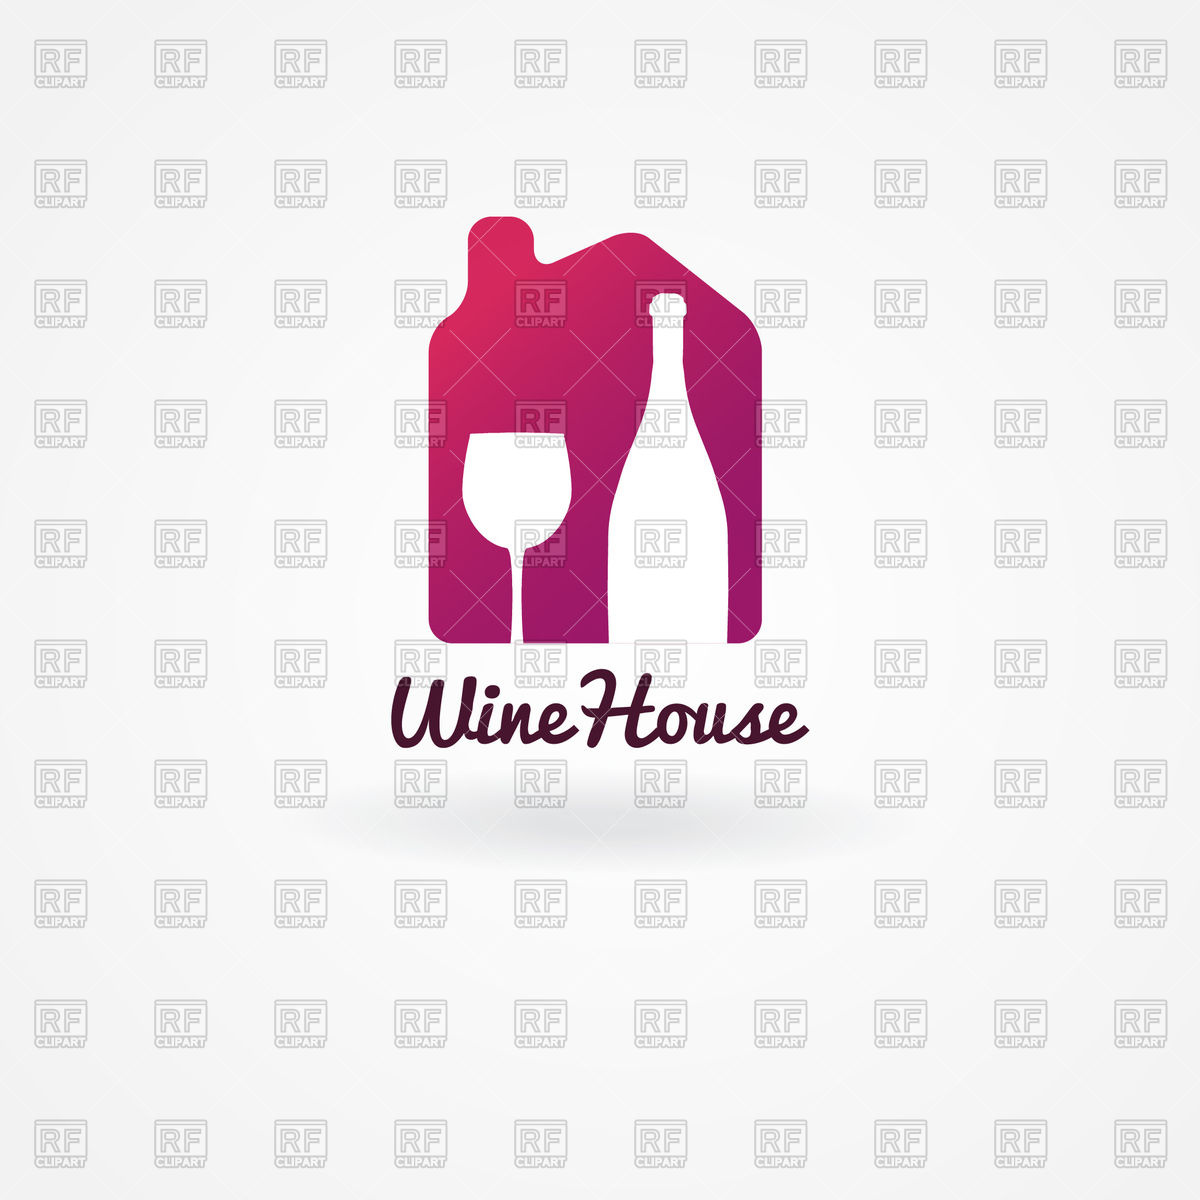 Winery Or Wine House Icon 80185 Download Royalty Free Vector Clipart